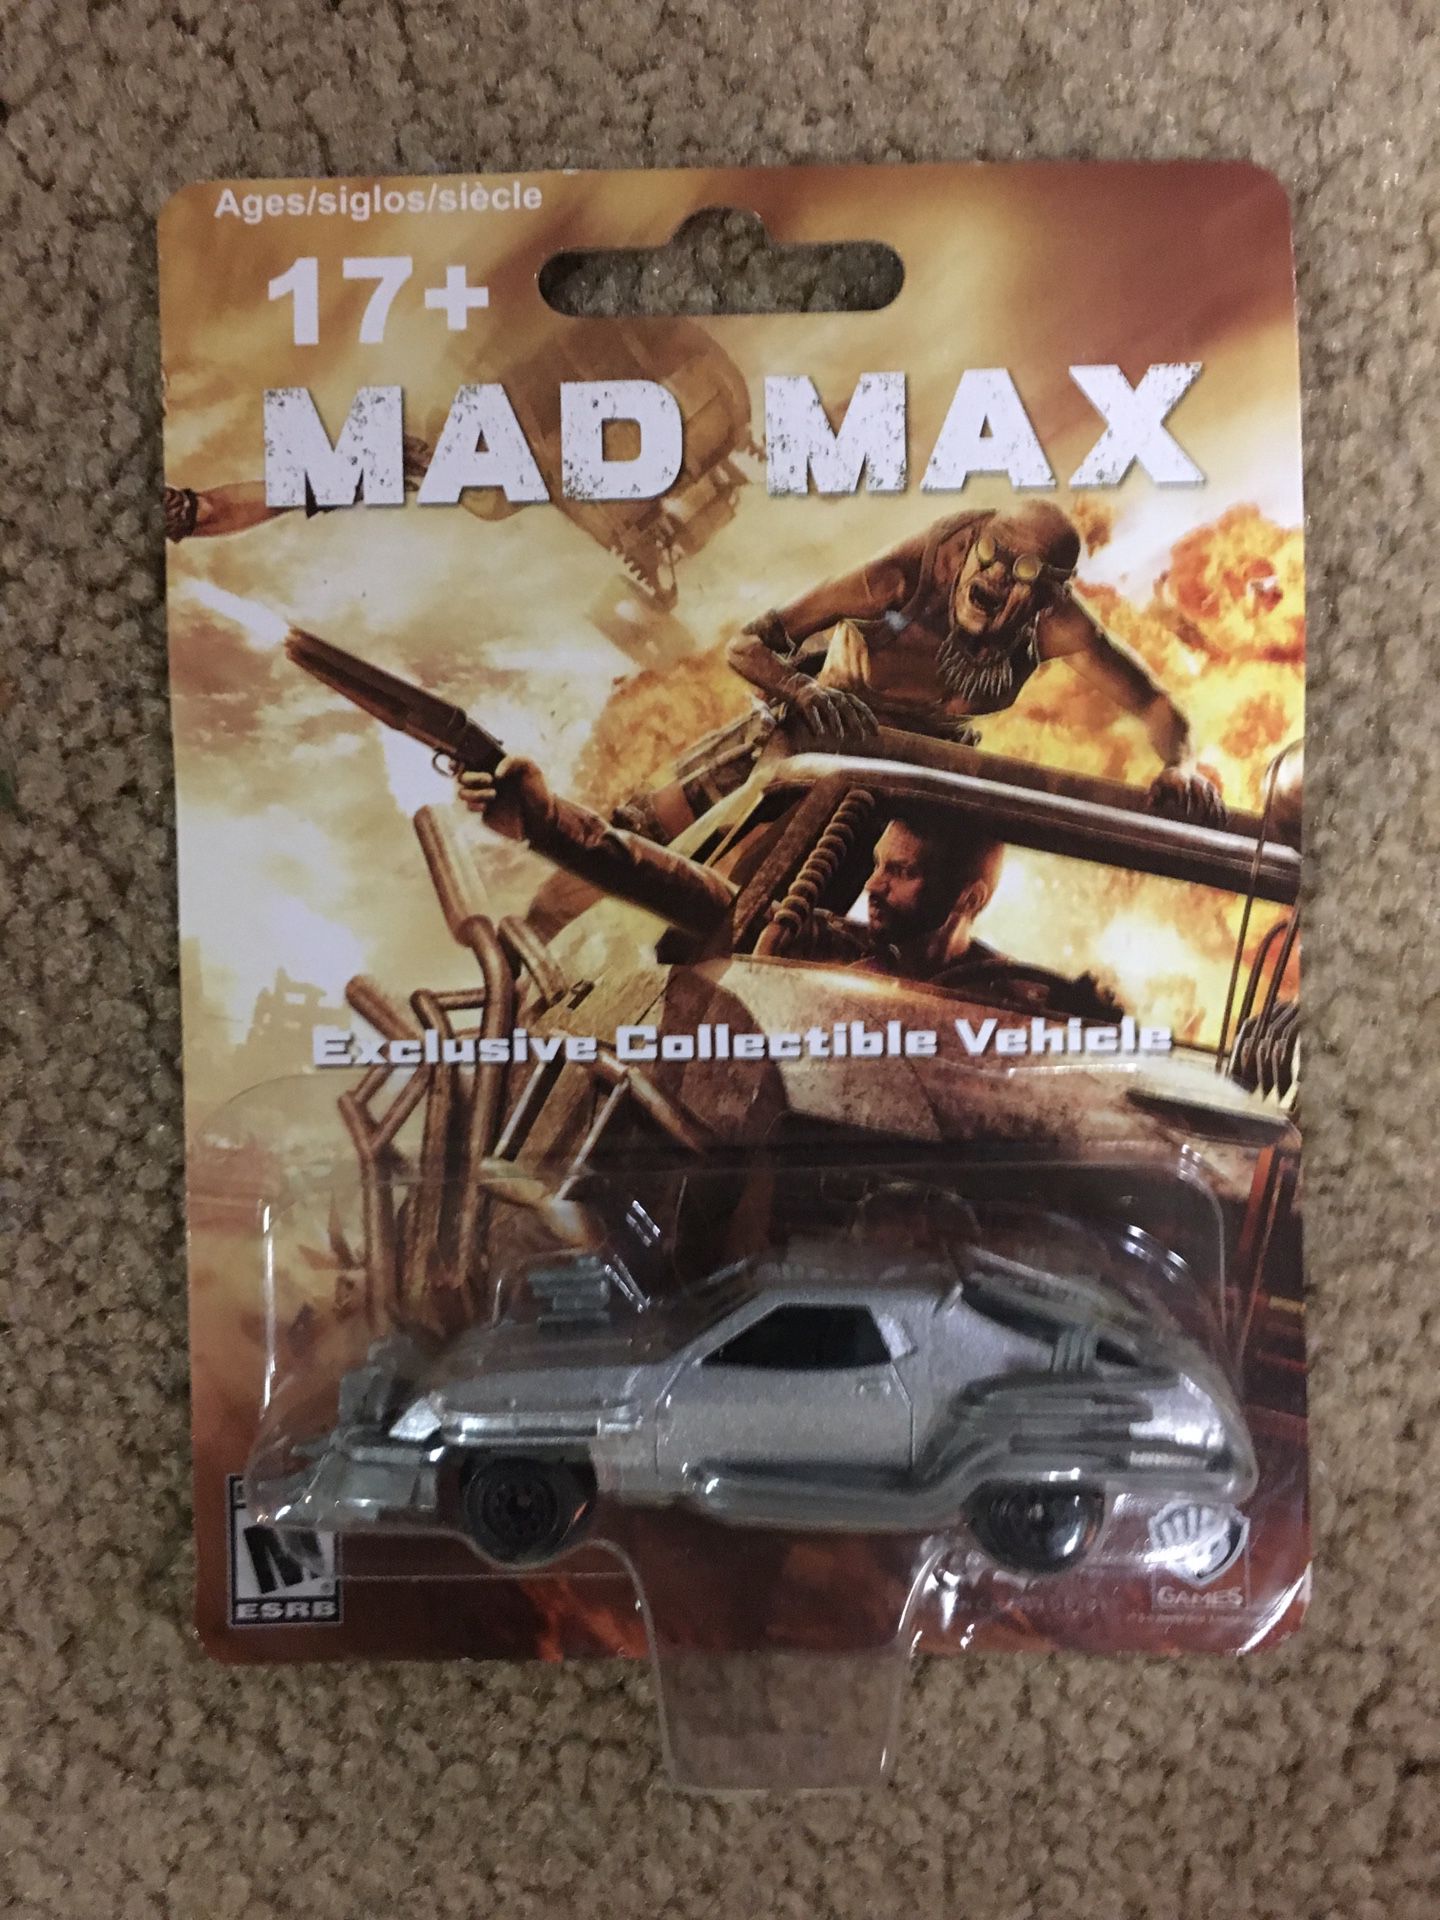 New never been opened Mad Max exclusive collectible toy